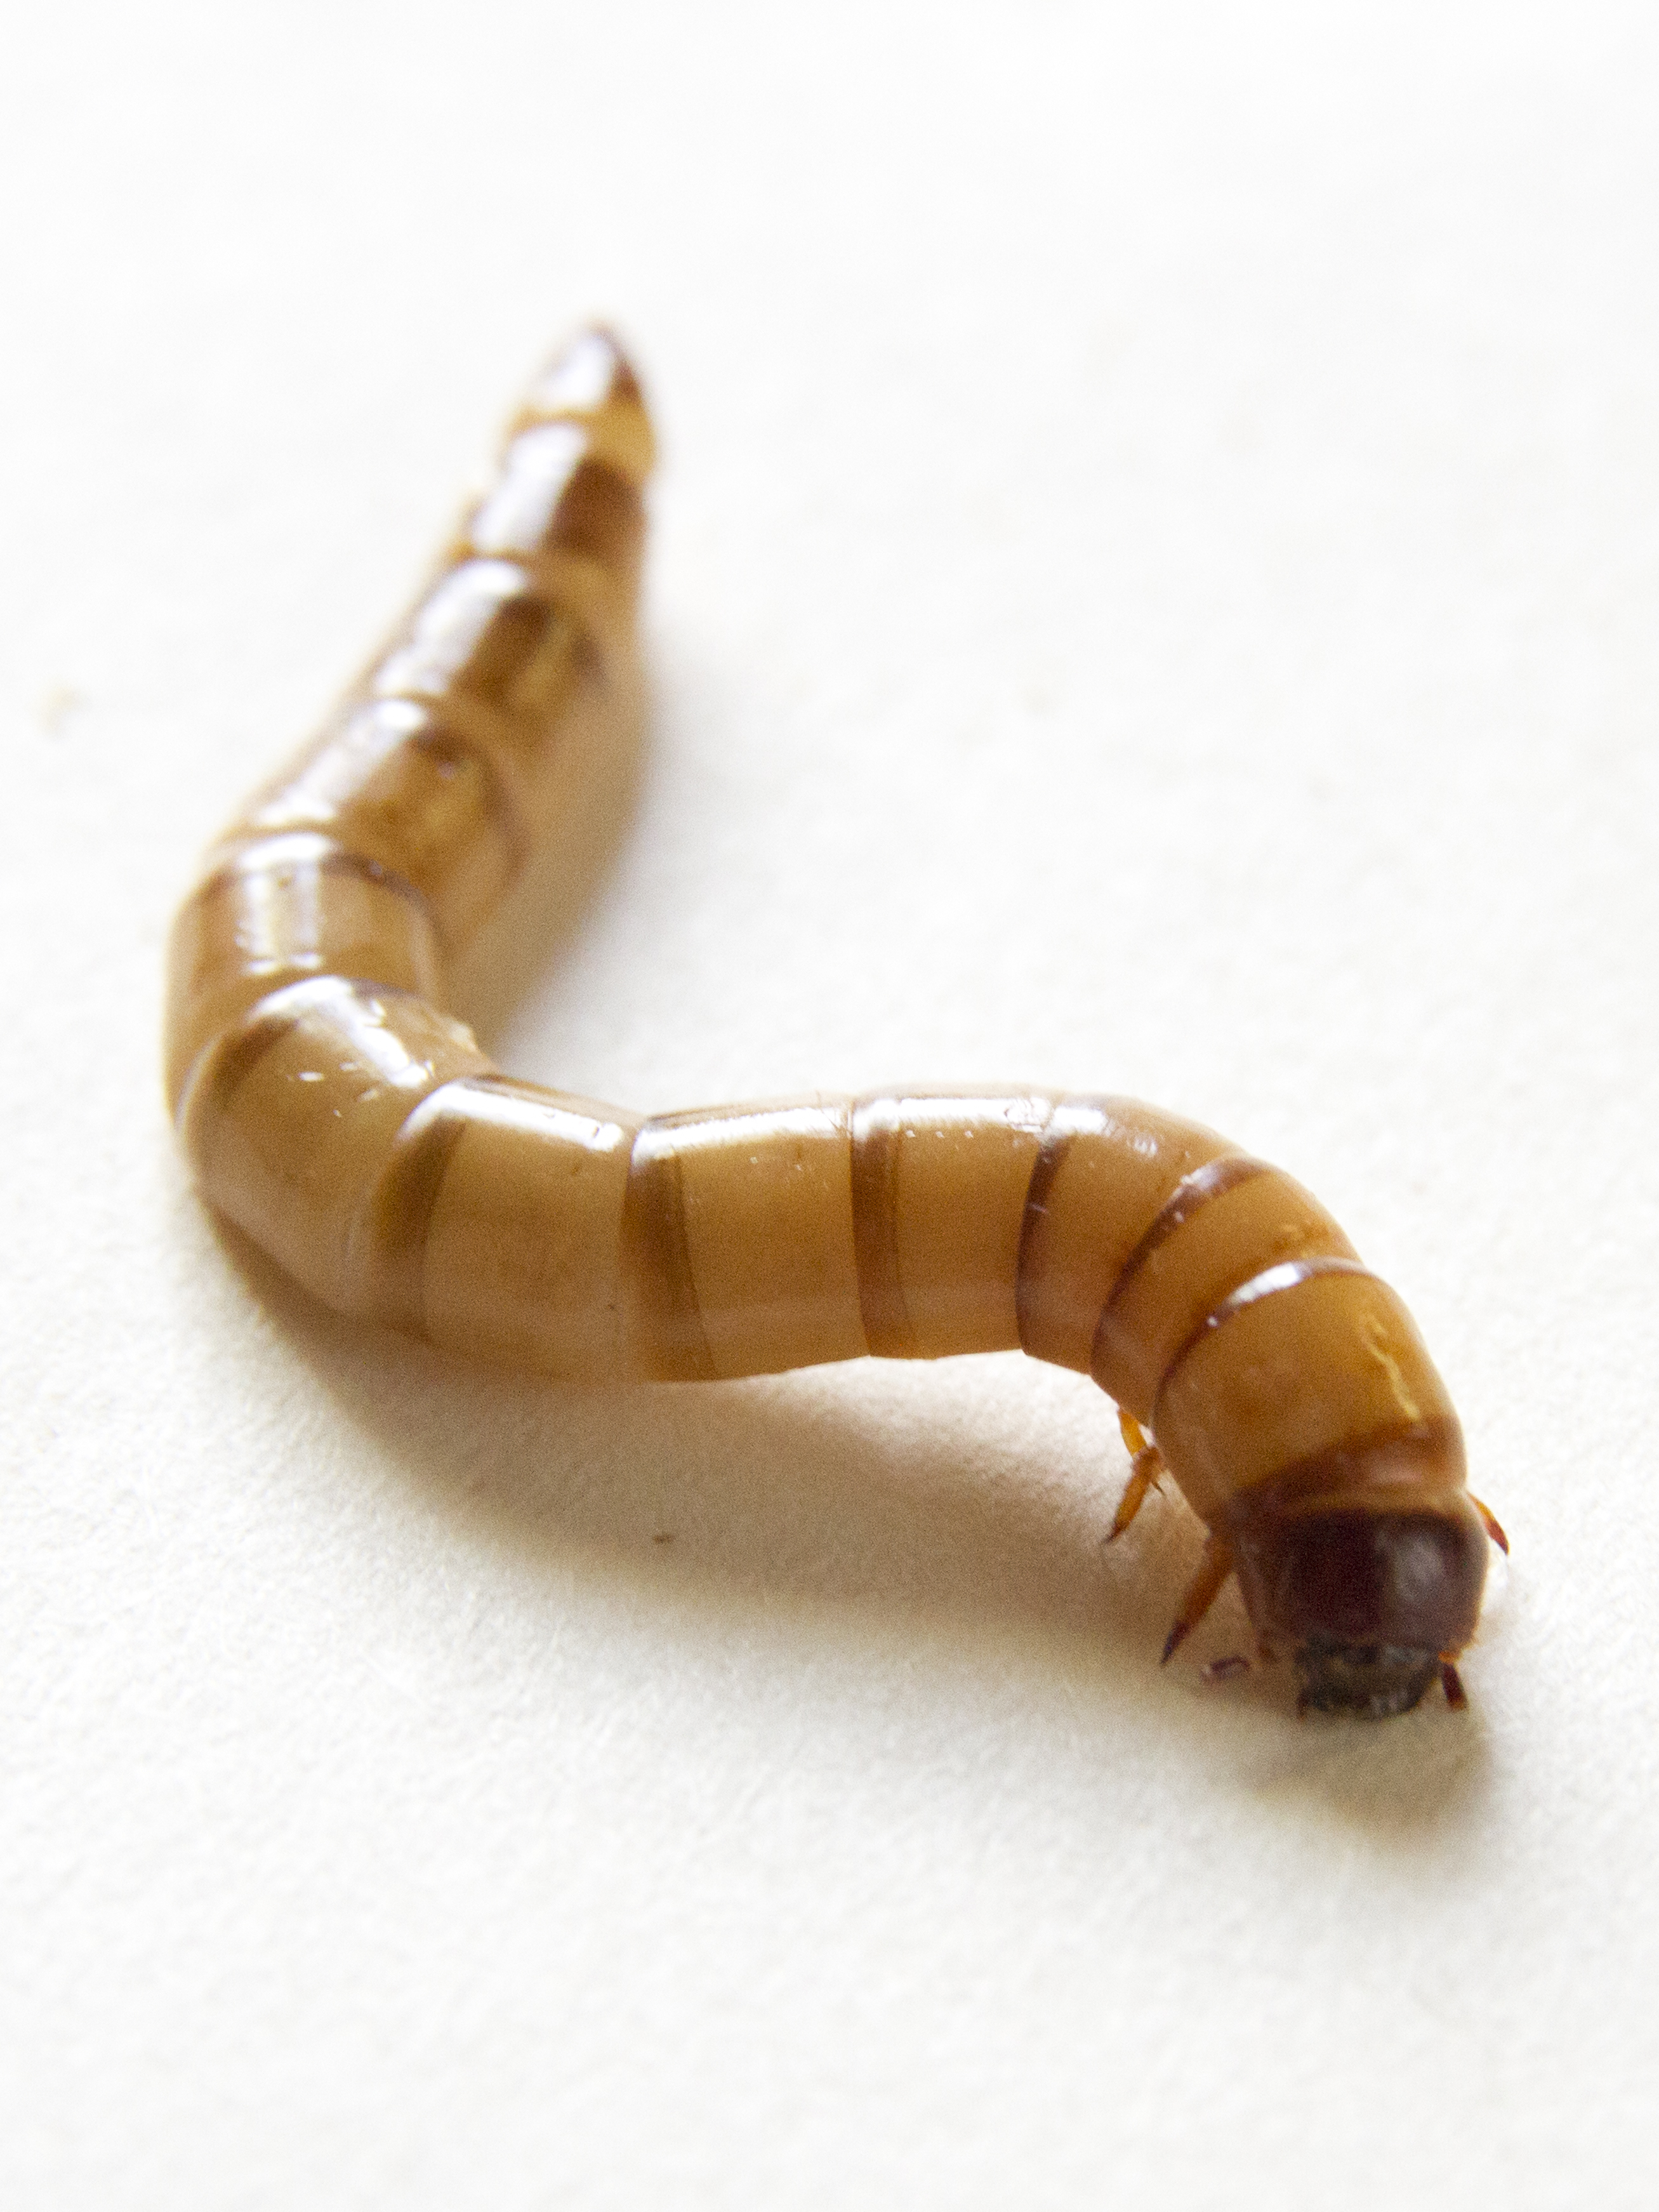 breeding super worms front view